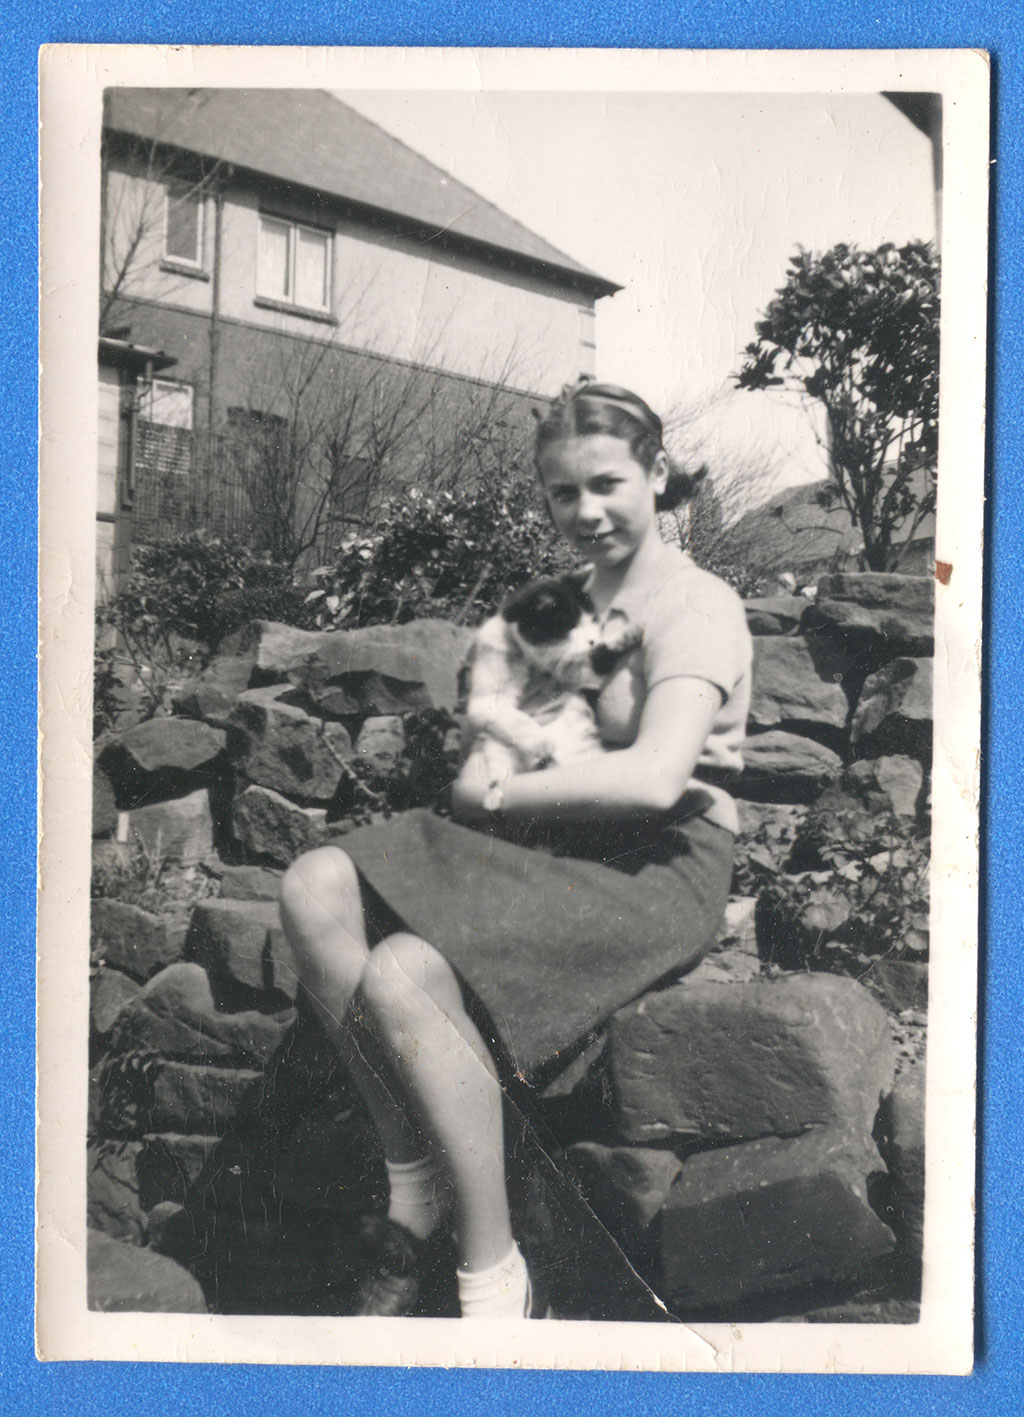 A young woman is sitting on a rock wall, holding a cat in her arms.